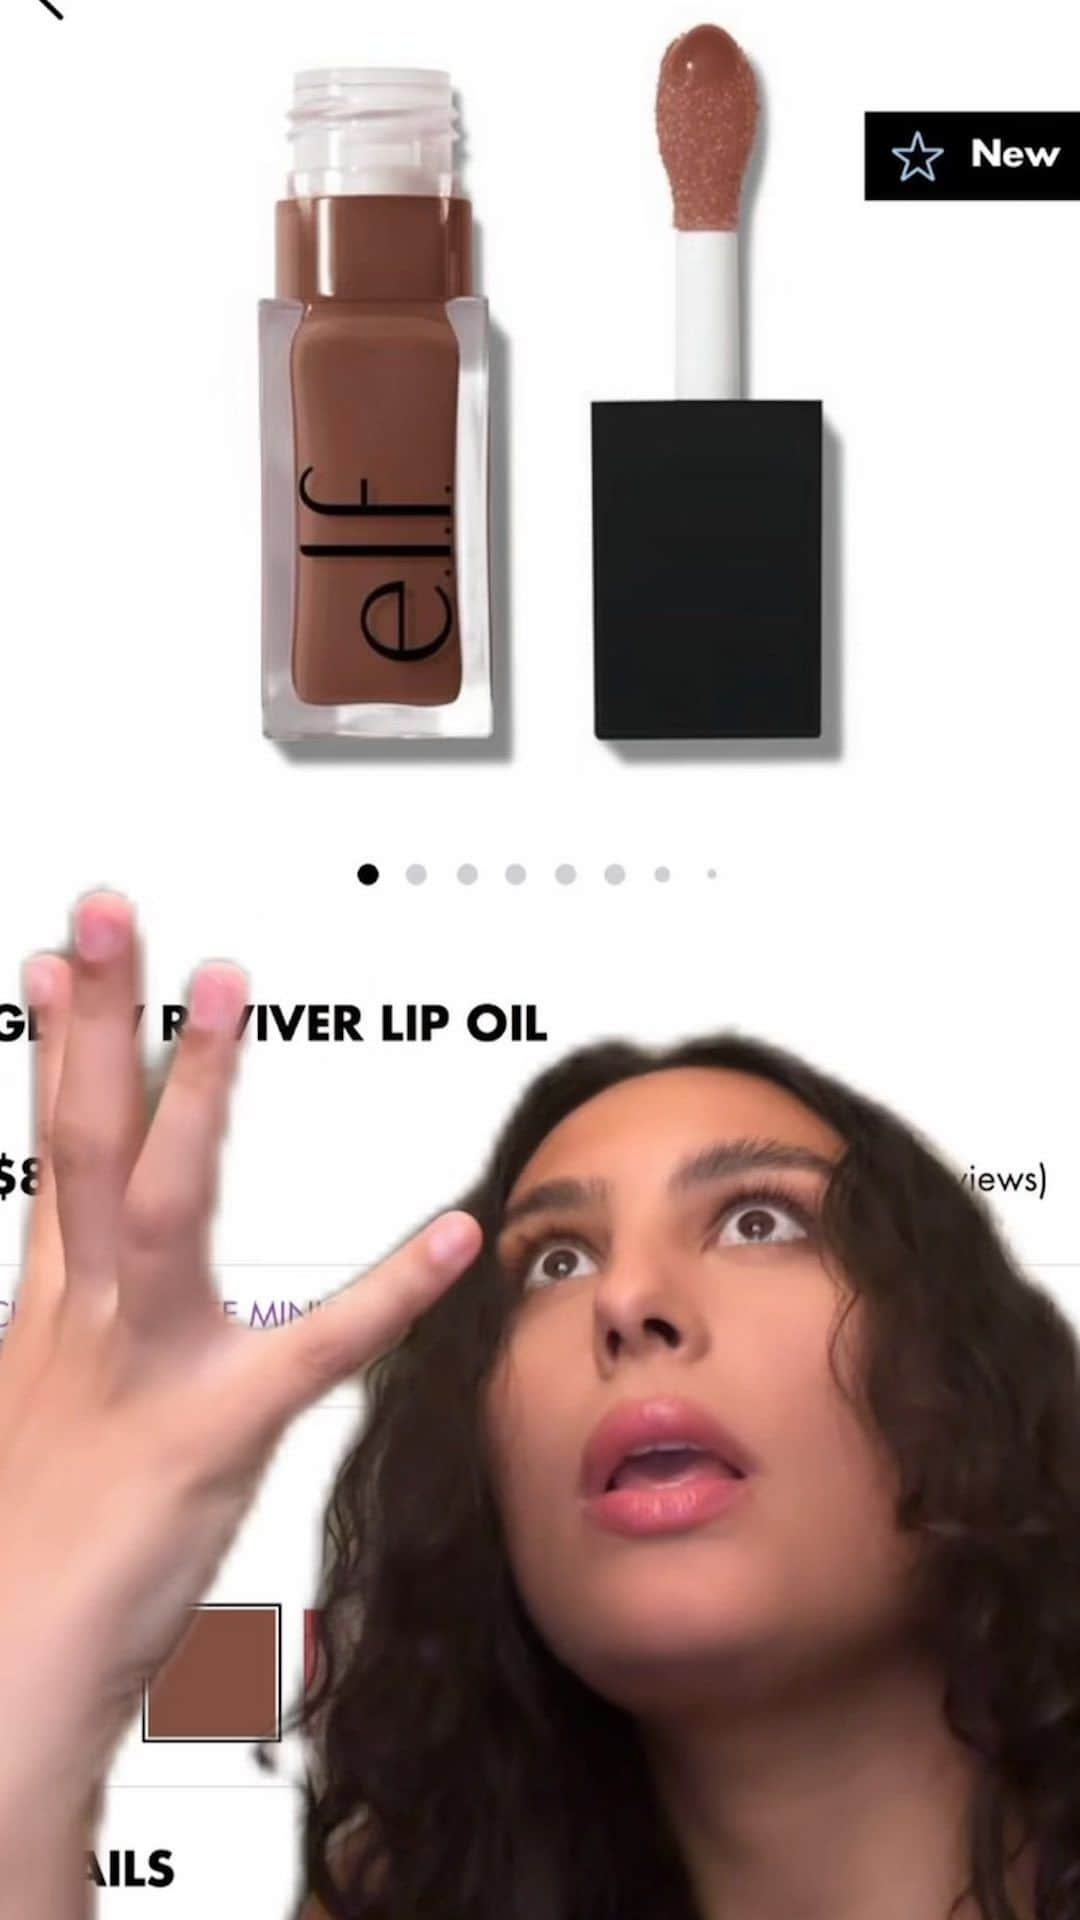 e.l.f.のインスタグラム：「On a scale from Crystal Clear to Jam Session, what’s your emotional state rn? 👀  #glowreviverlipoil #lipoil #elfcosmetics #elfingamazing #eyeslipsface #vegan #crueltyfree」